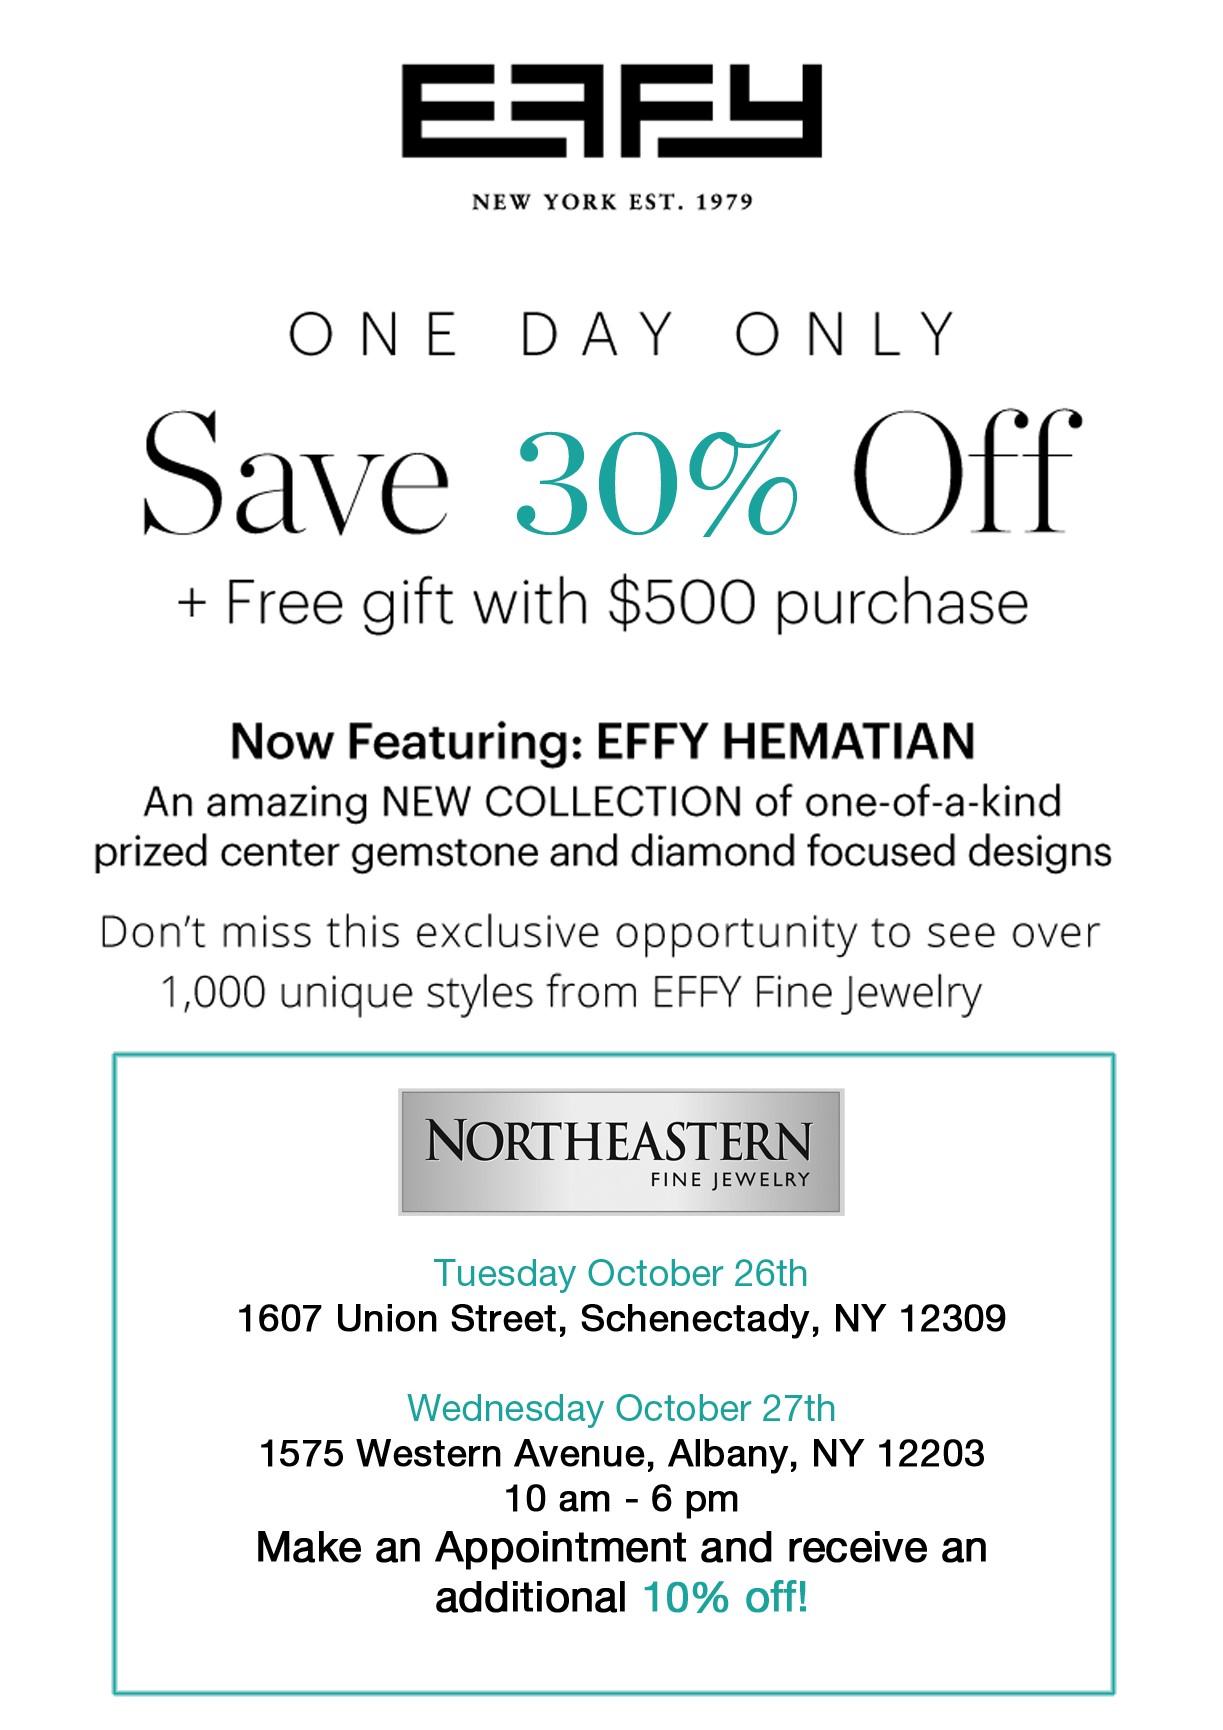 Experience Exclusive Savings at the Effy Trunk Show at Northeastern Fine Jewelry